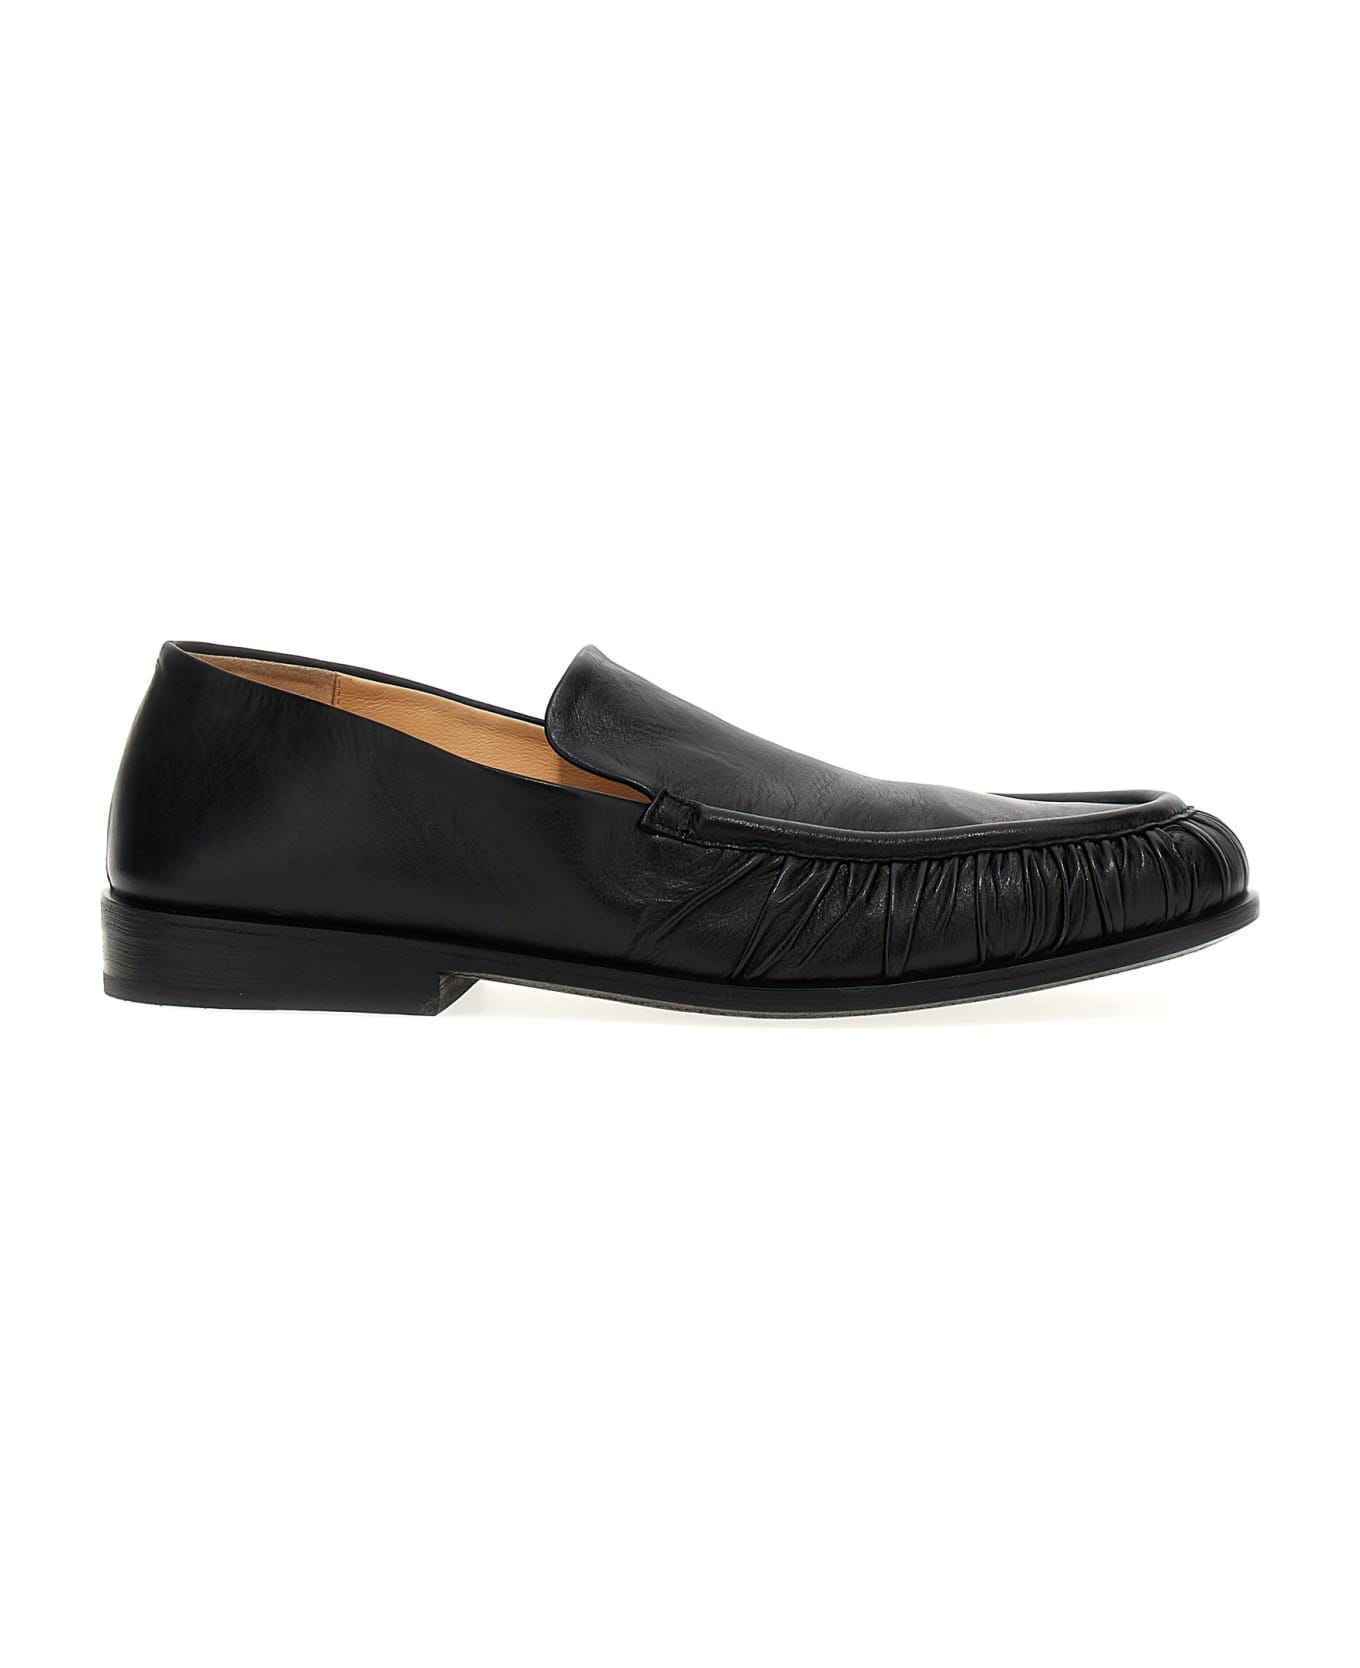 Marsell 'mocassino' Loafers - Black  